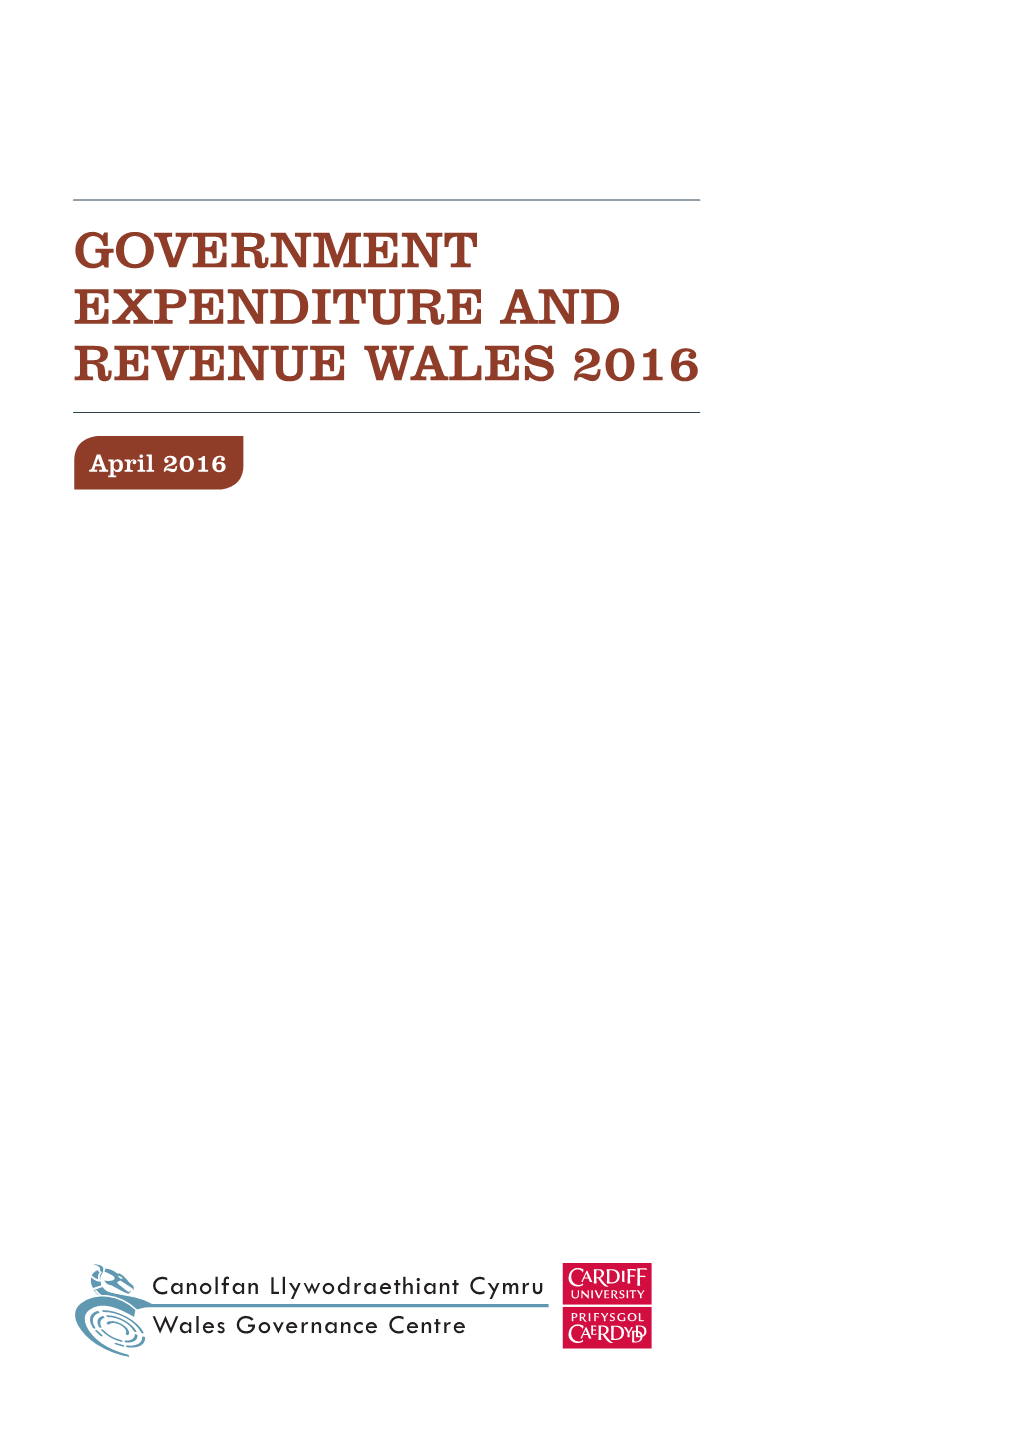 Government Expenditure and Revenue Wales 2016